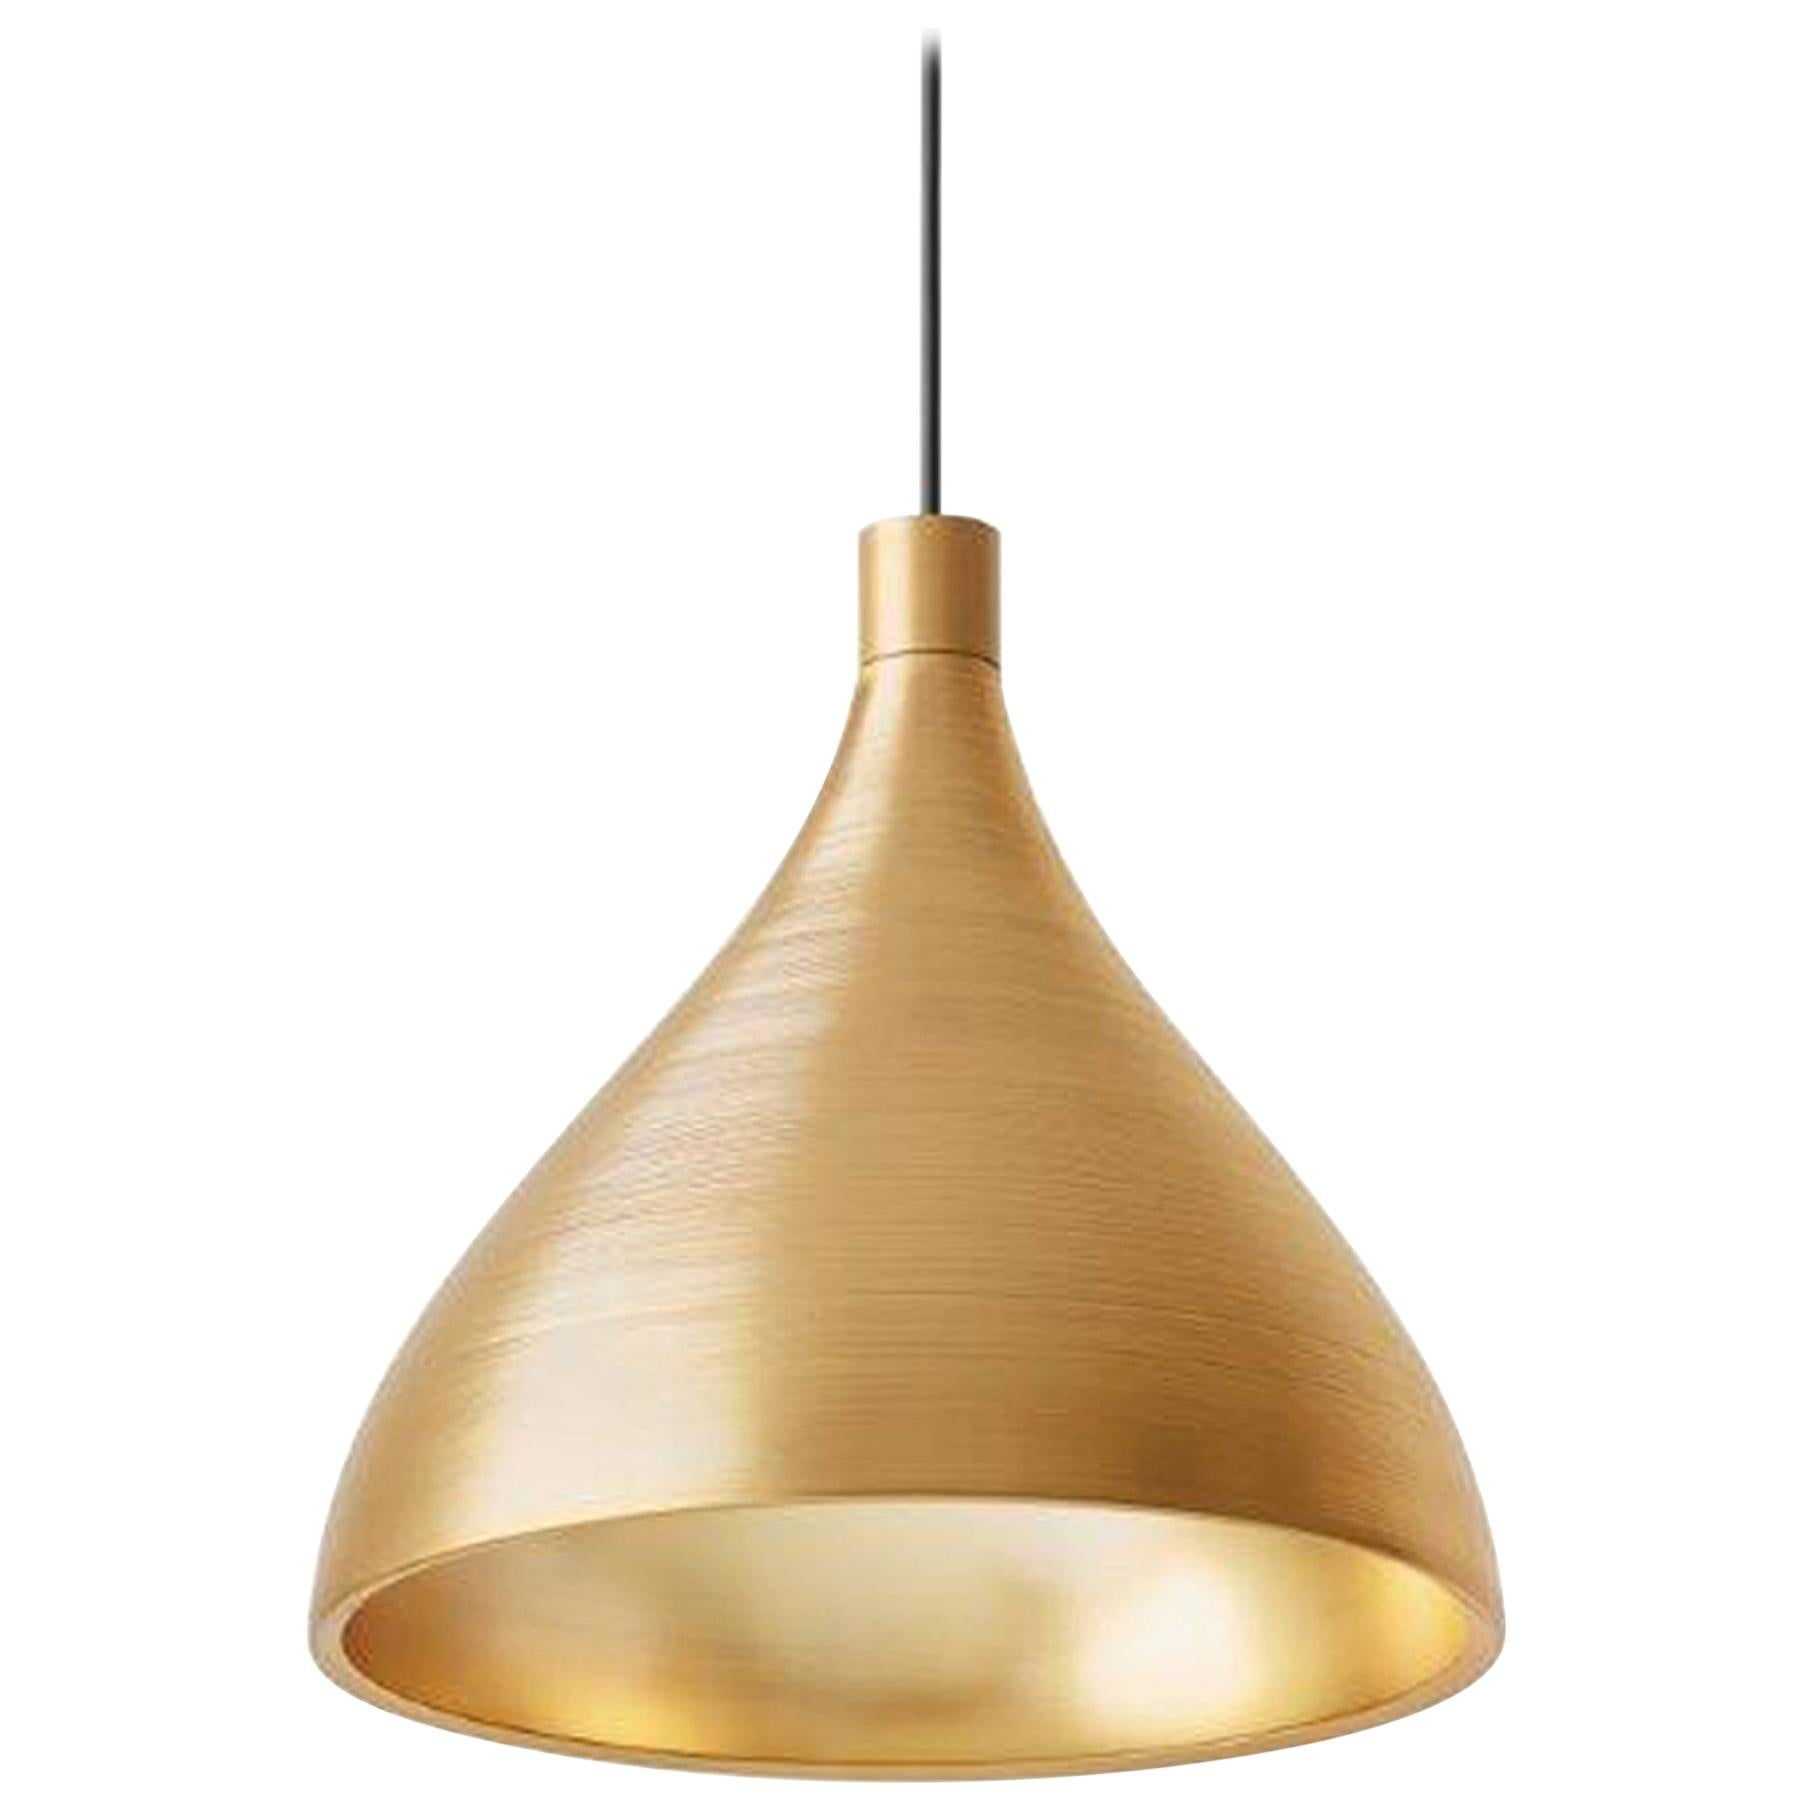 Swell XL Single Medium LED Pendant Lamp in Brass by Pablo Designs